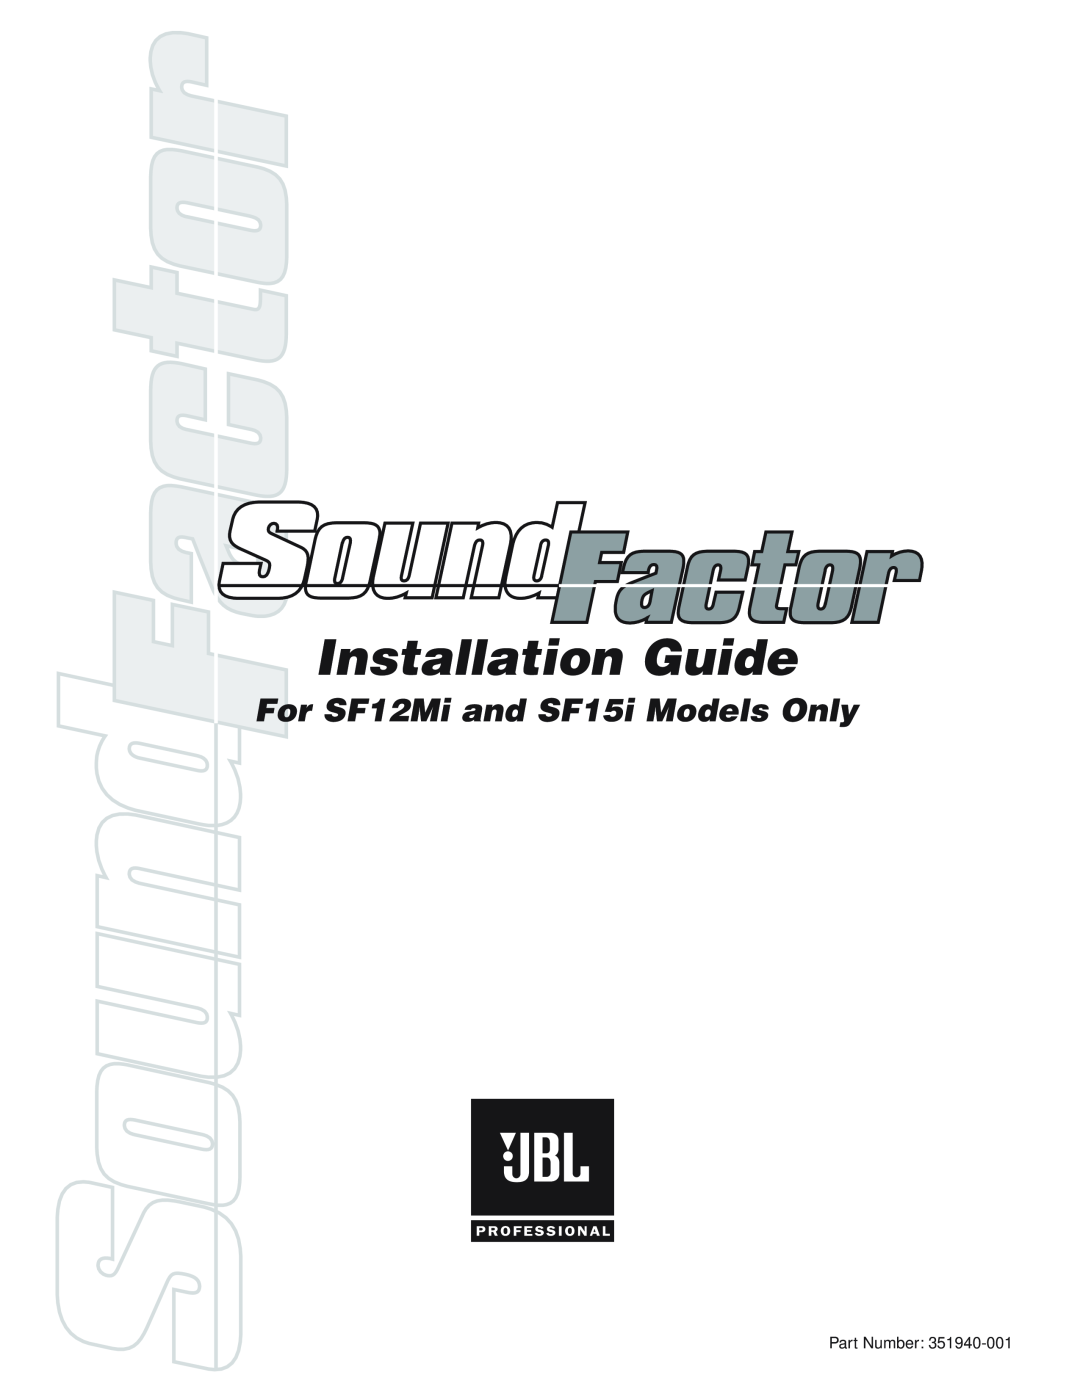 JBL Professional manual Installation Guide, For SF12Mi and SF15i Models Only 